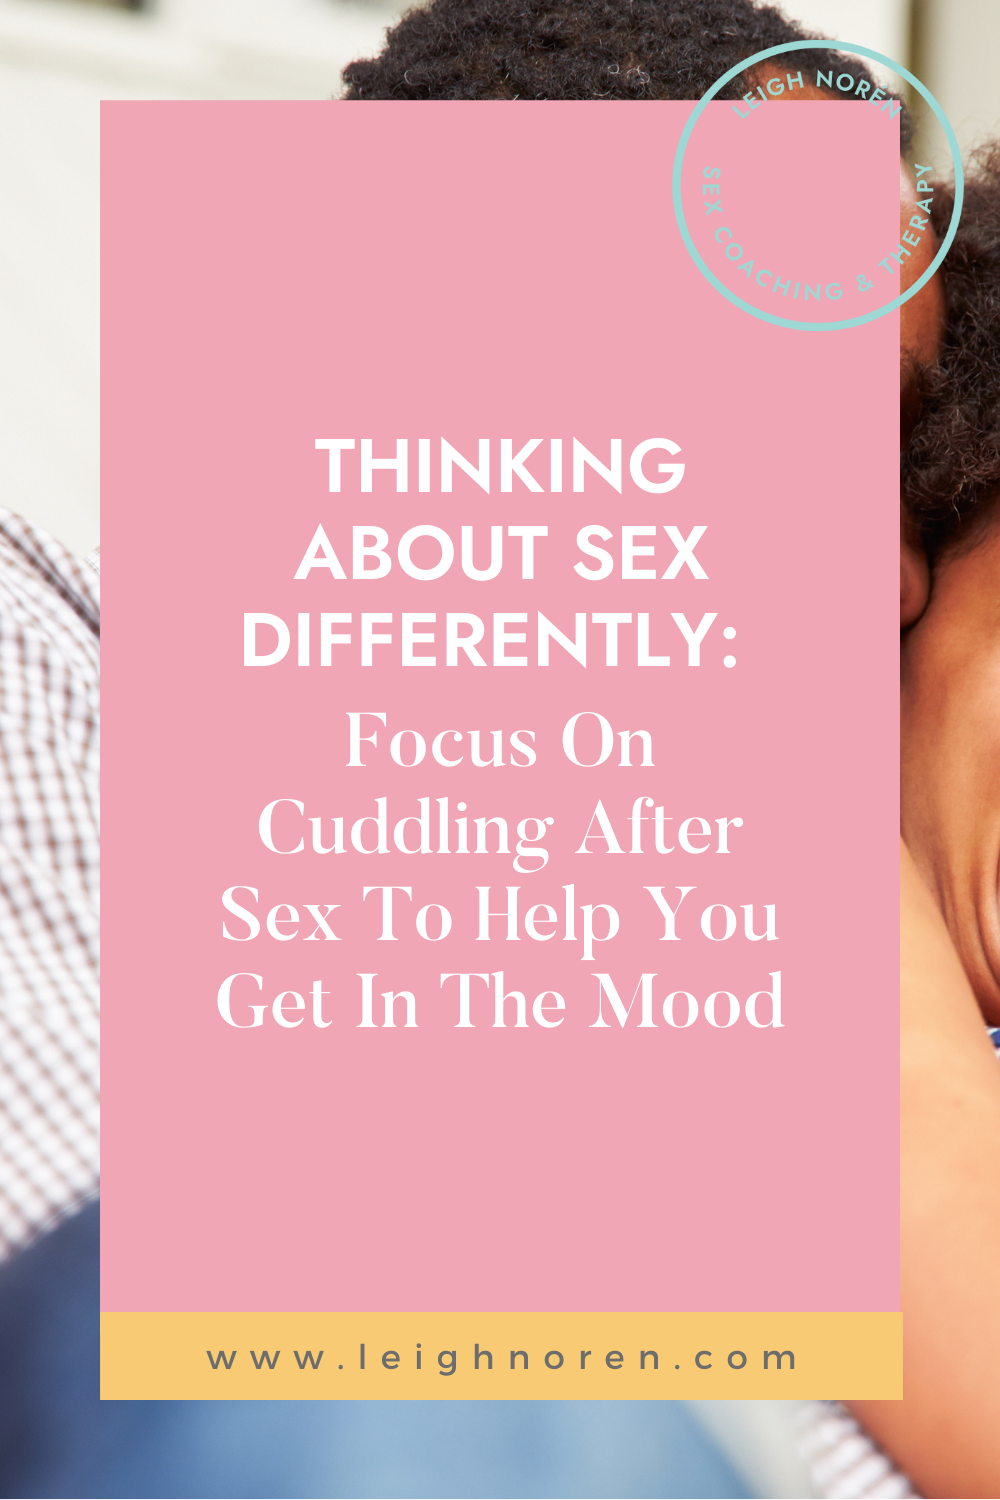 Thinking About Sex Differently: Focus On Cuddling After Sex To Help You Get In The Mood